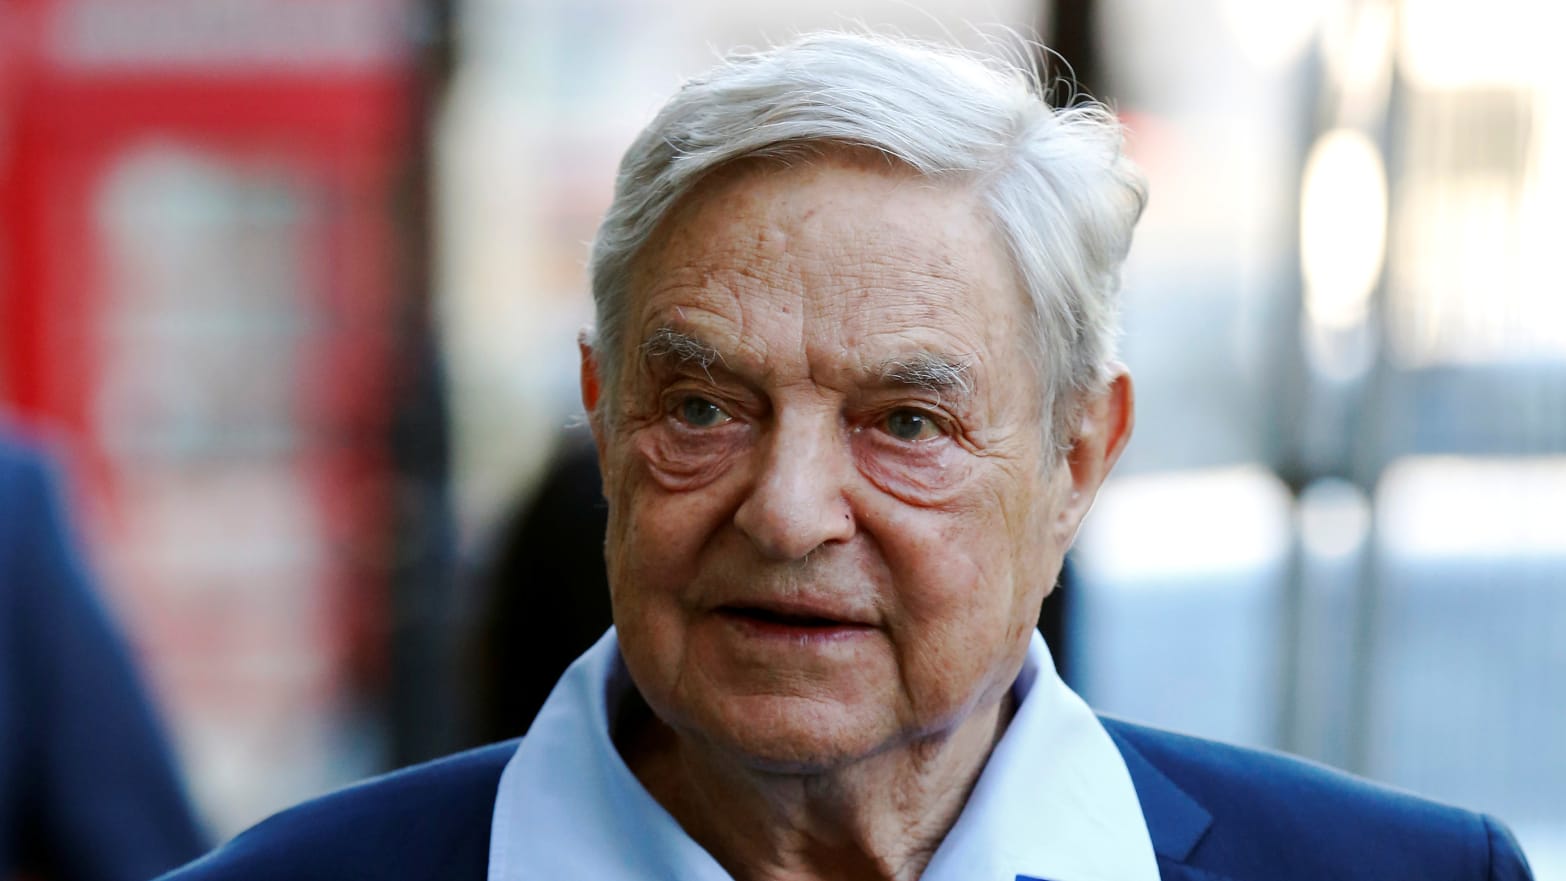 Who is George Soros and why is he blamed in so many conspiracy